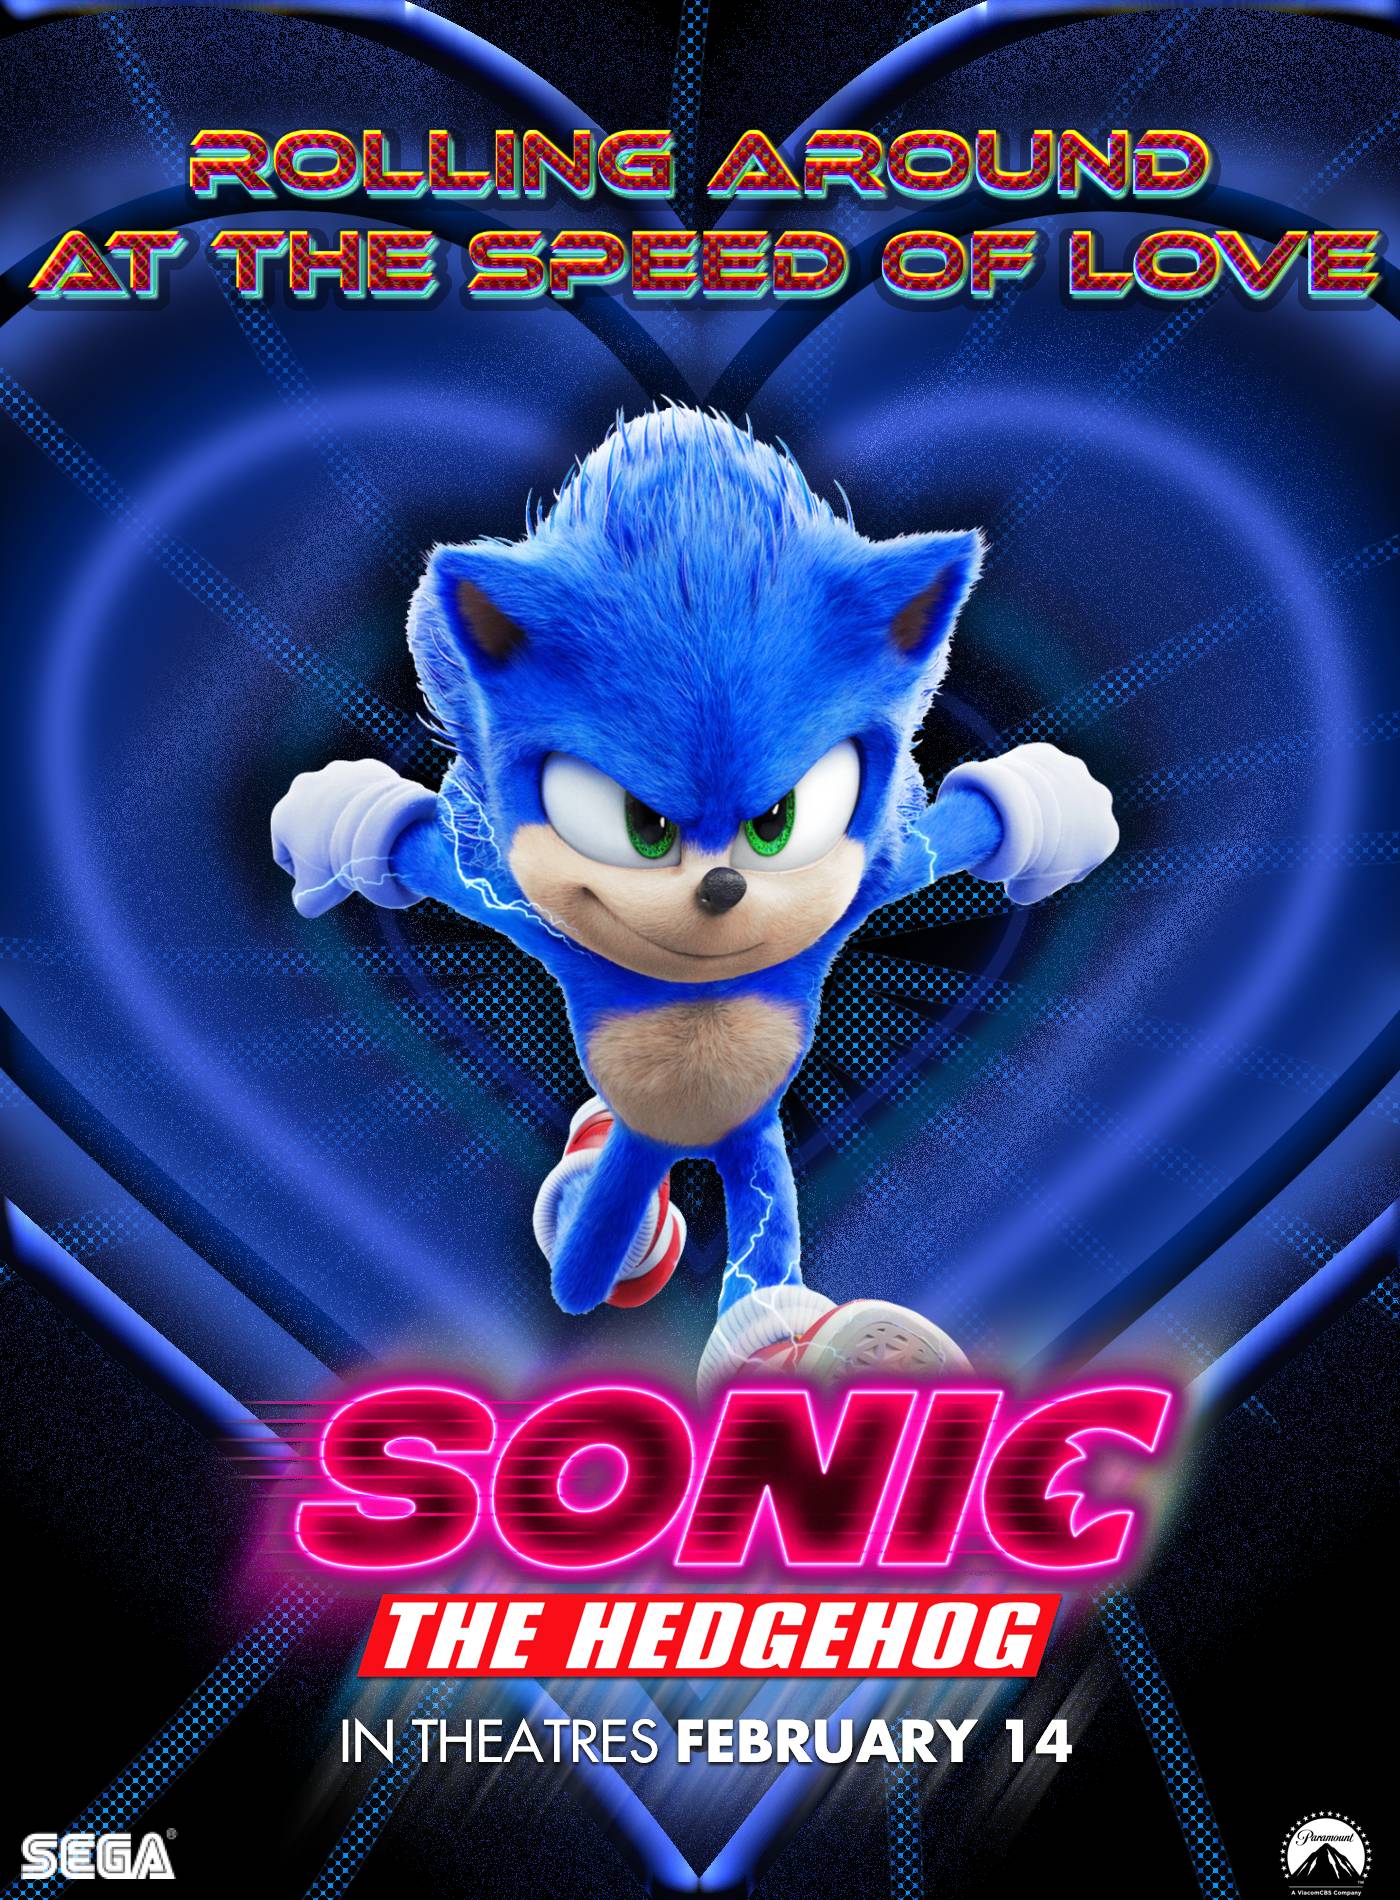 Sonic the hedgehog poster